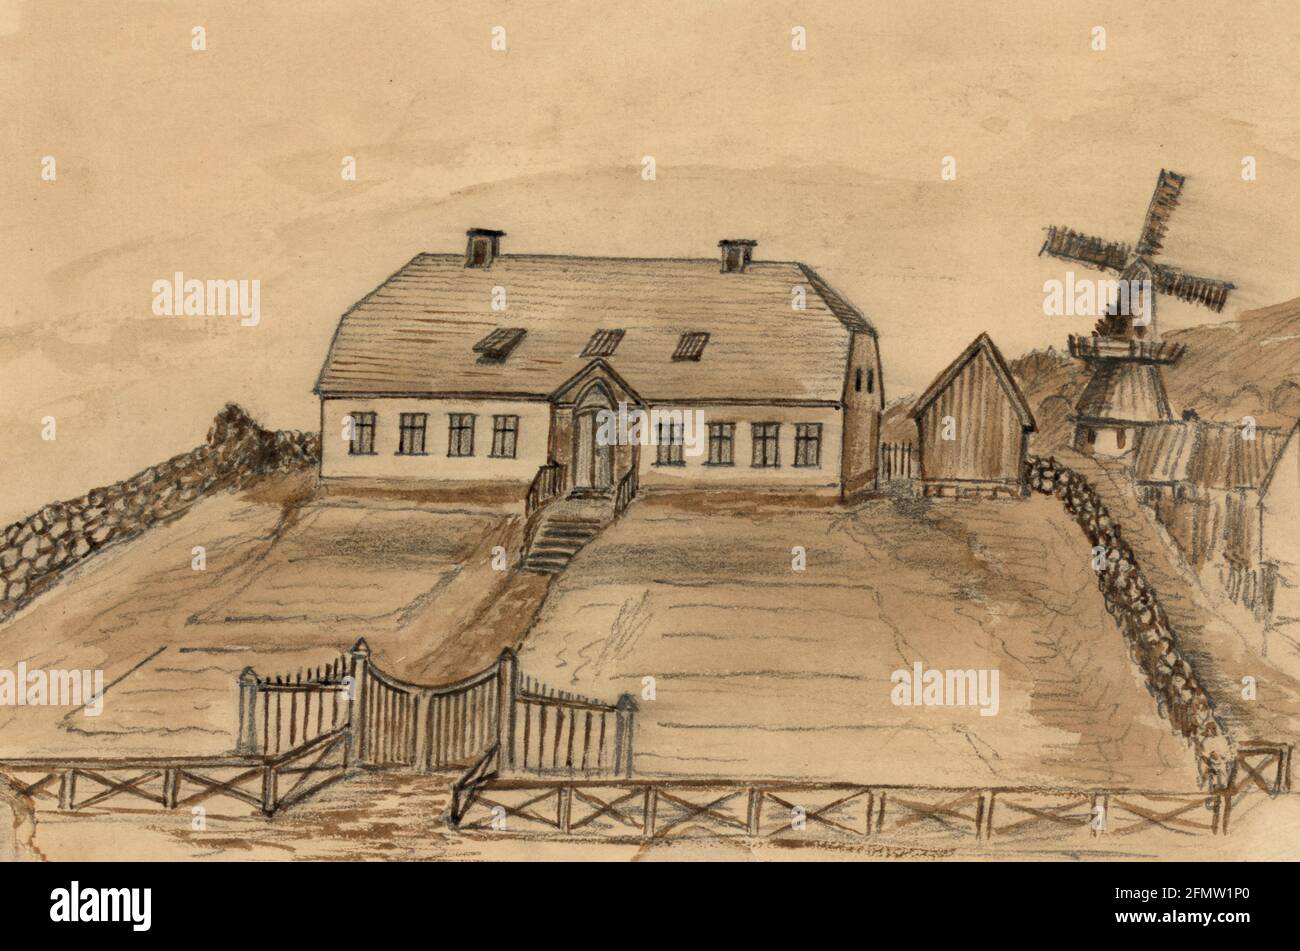 Governor's residence Reykjavik -  Drawing shows a large two-story house surrounded by a stone wall, the residence of the Governor of Iceland in the capitol city, Reykjavk. Bayard Taylor visited Iceland in 1862, perhaps en route to Russia Stock Photo